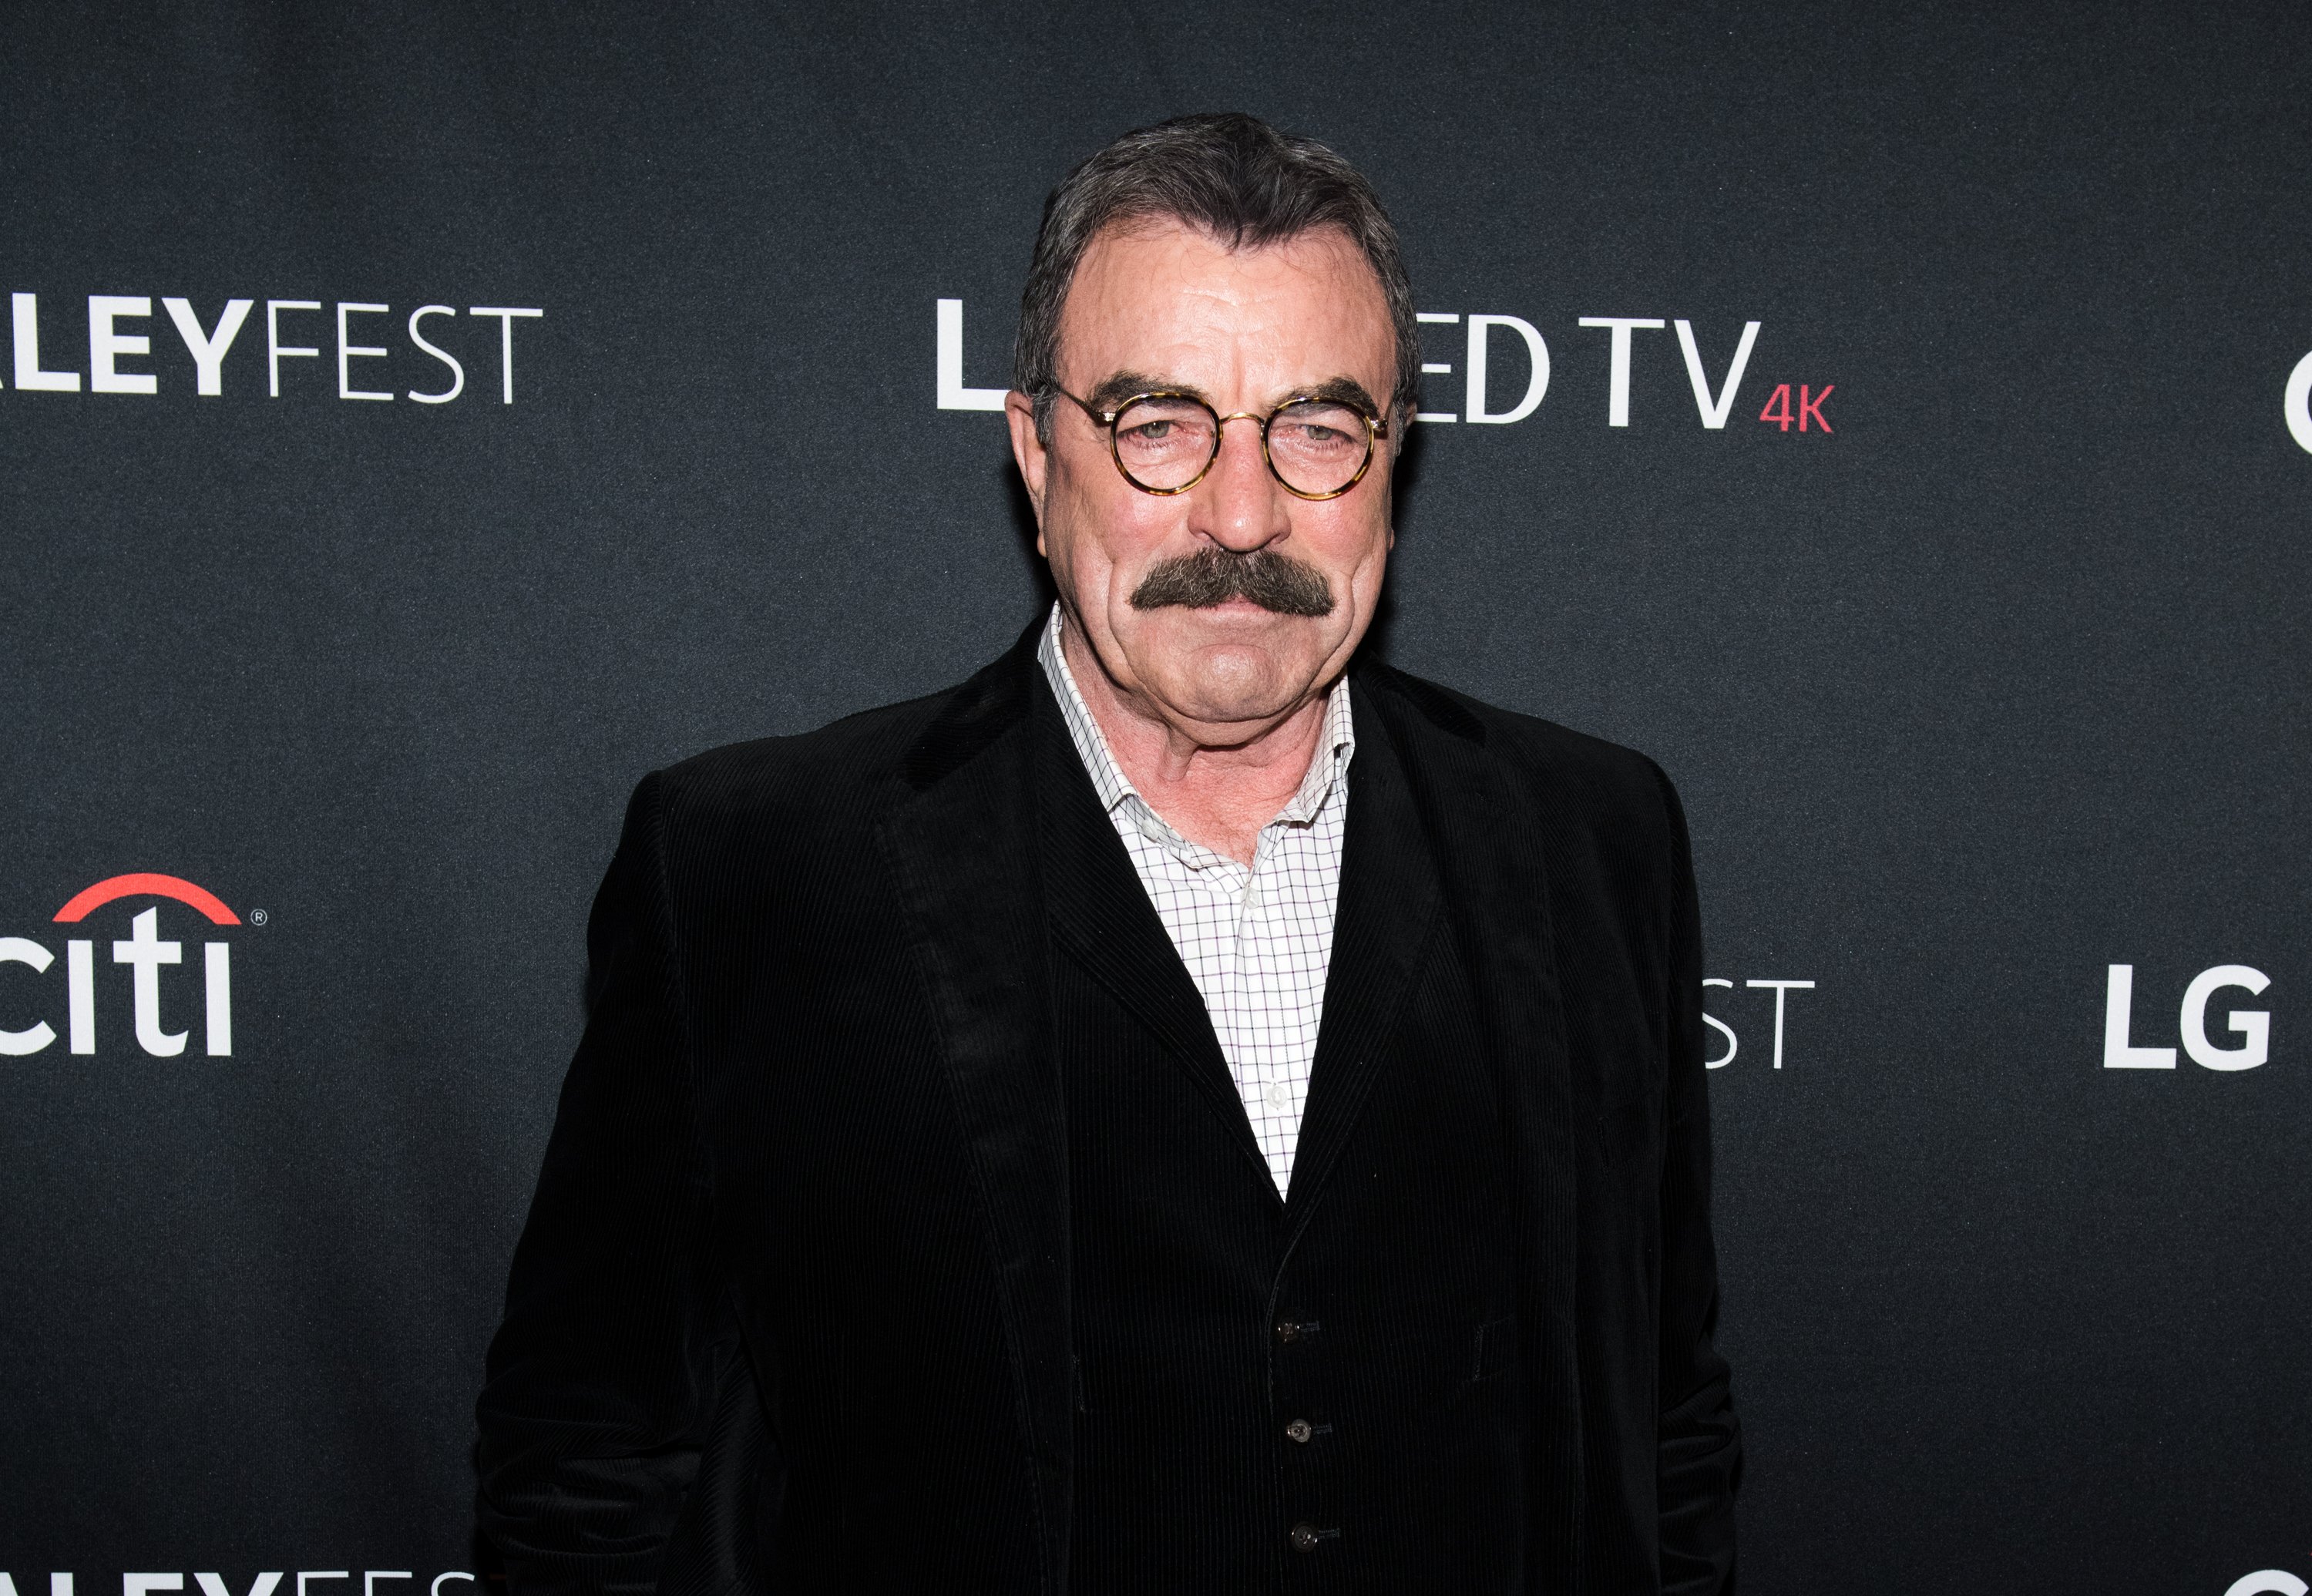 Tom Selleck attends the "Blue Bloods" screening during the PaleyFest NY 2017 at The Paley Center for Media on October 16, 2017 in New York City. | Photo: Getty Images